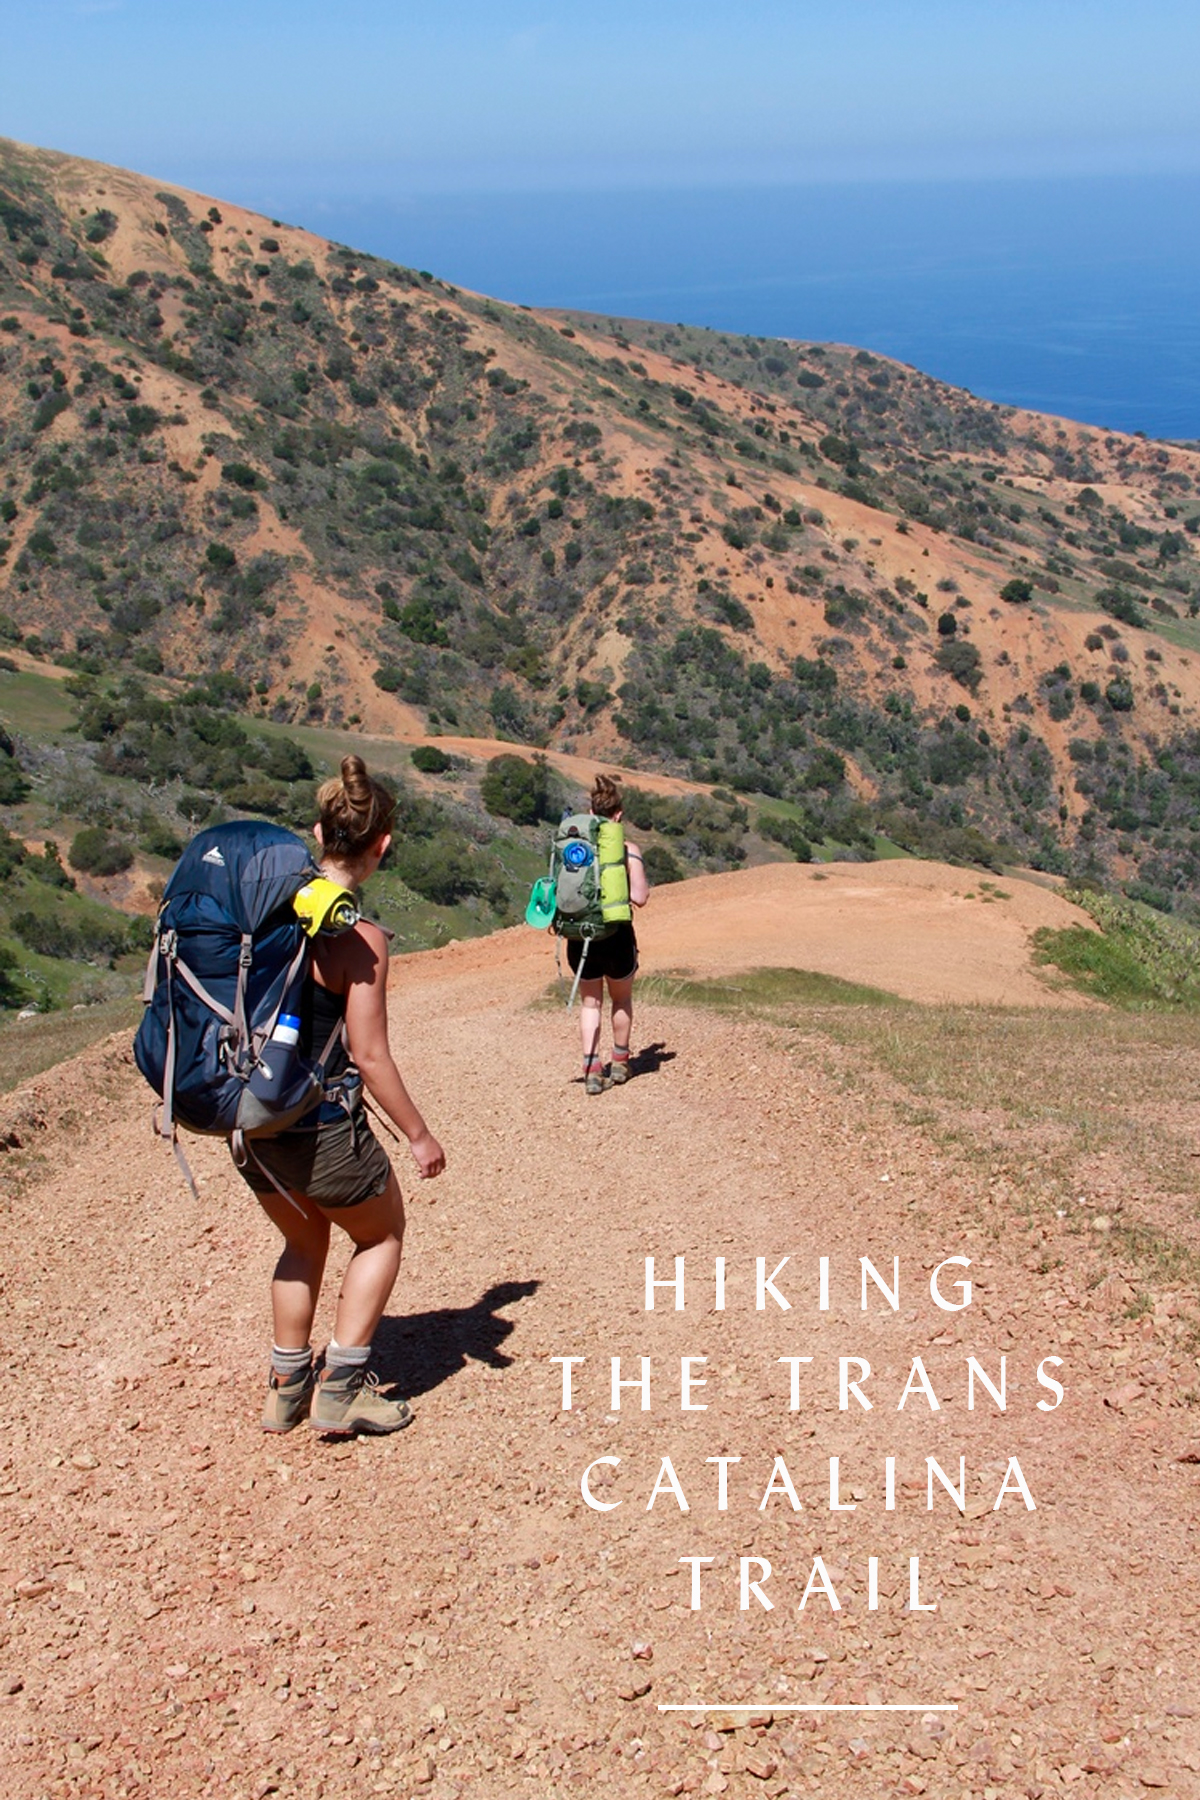 Hiking the Trans Catalina Trail, a Cadence of Pain